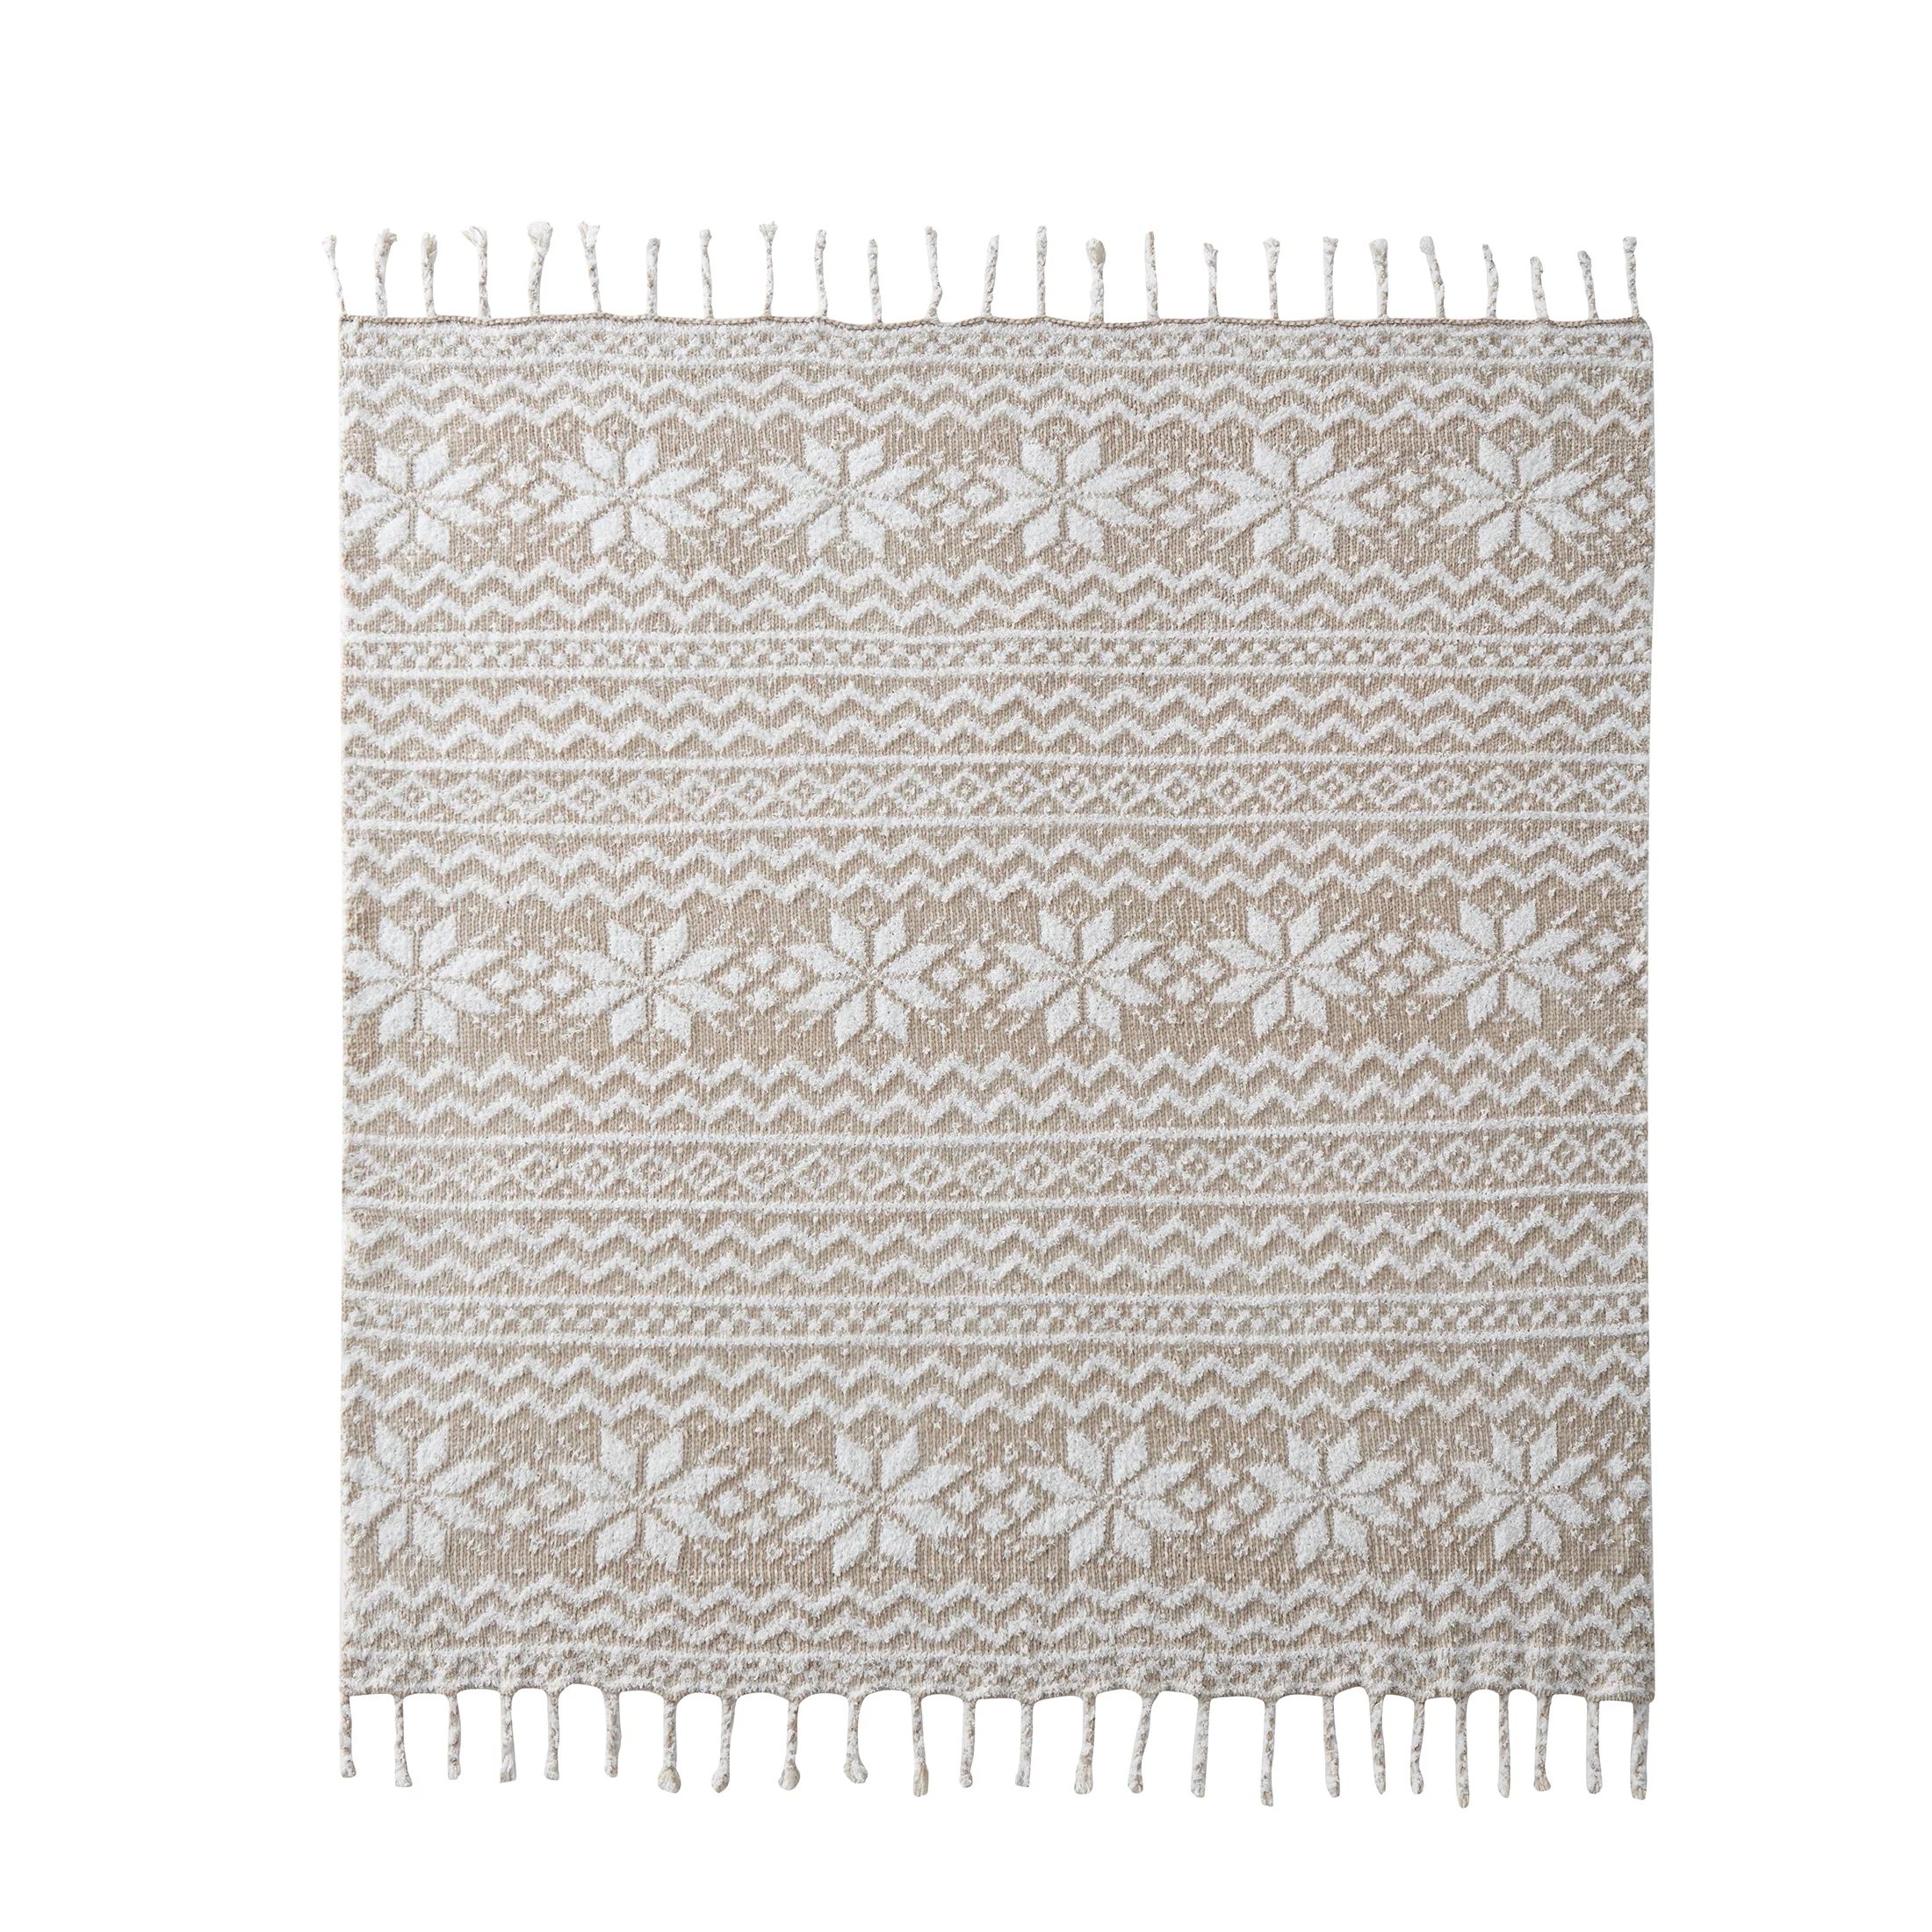 My Texas House Aspen Chenille Snowflake Holiday Throw, Easy Wash, 50 x 60, Taupe | Walmart (US)